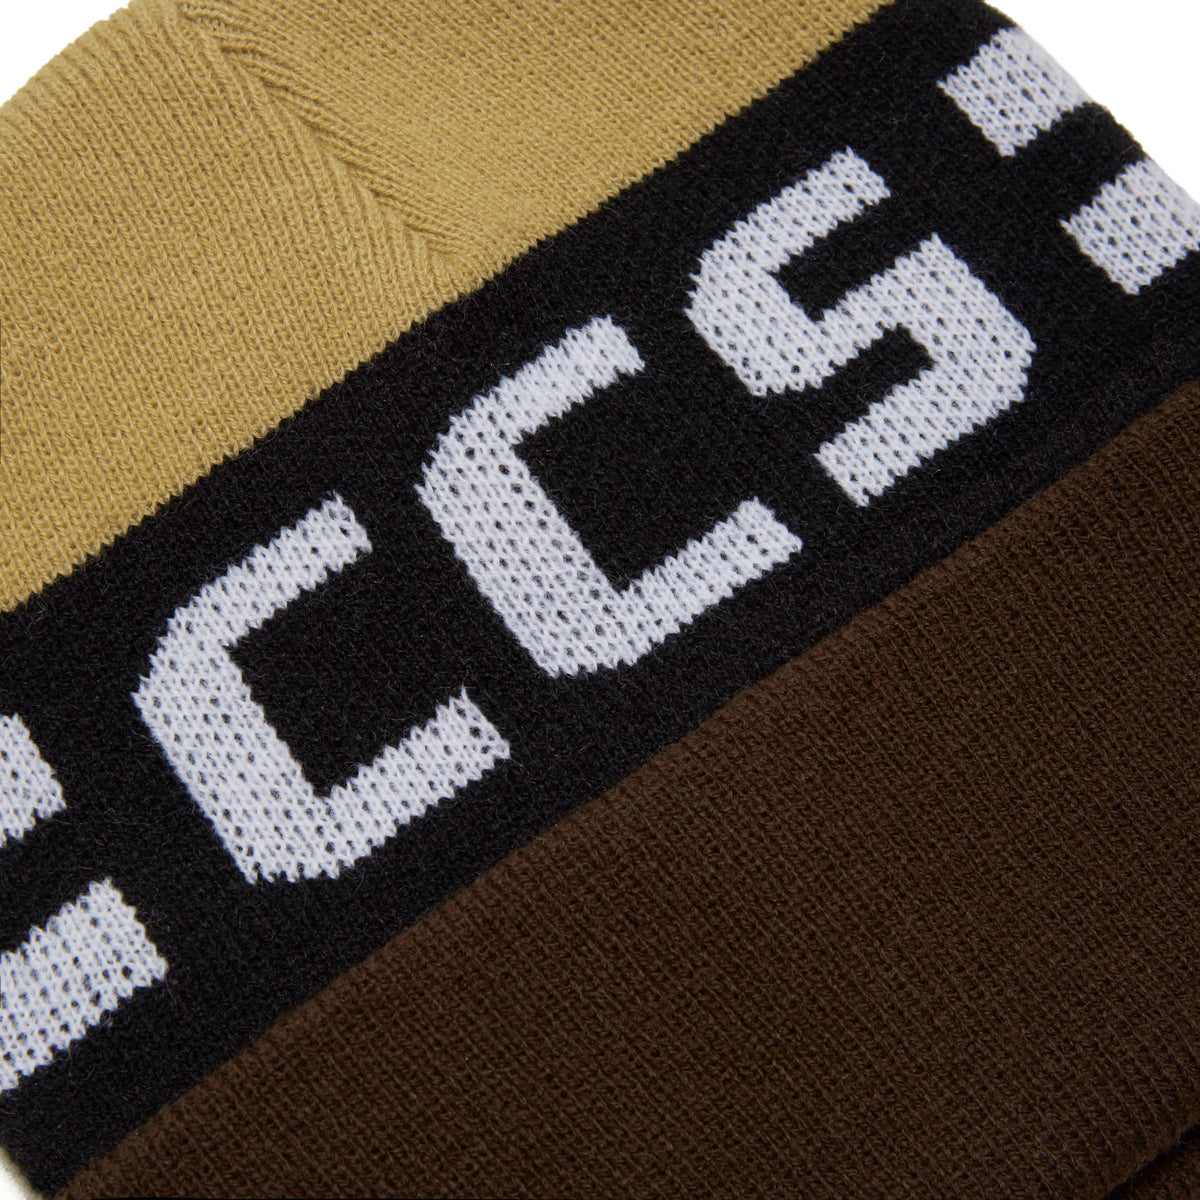 CCS Blockletters Beanie - Brown/Tan image 3